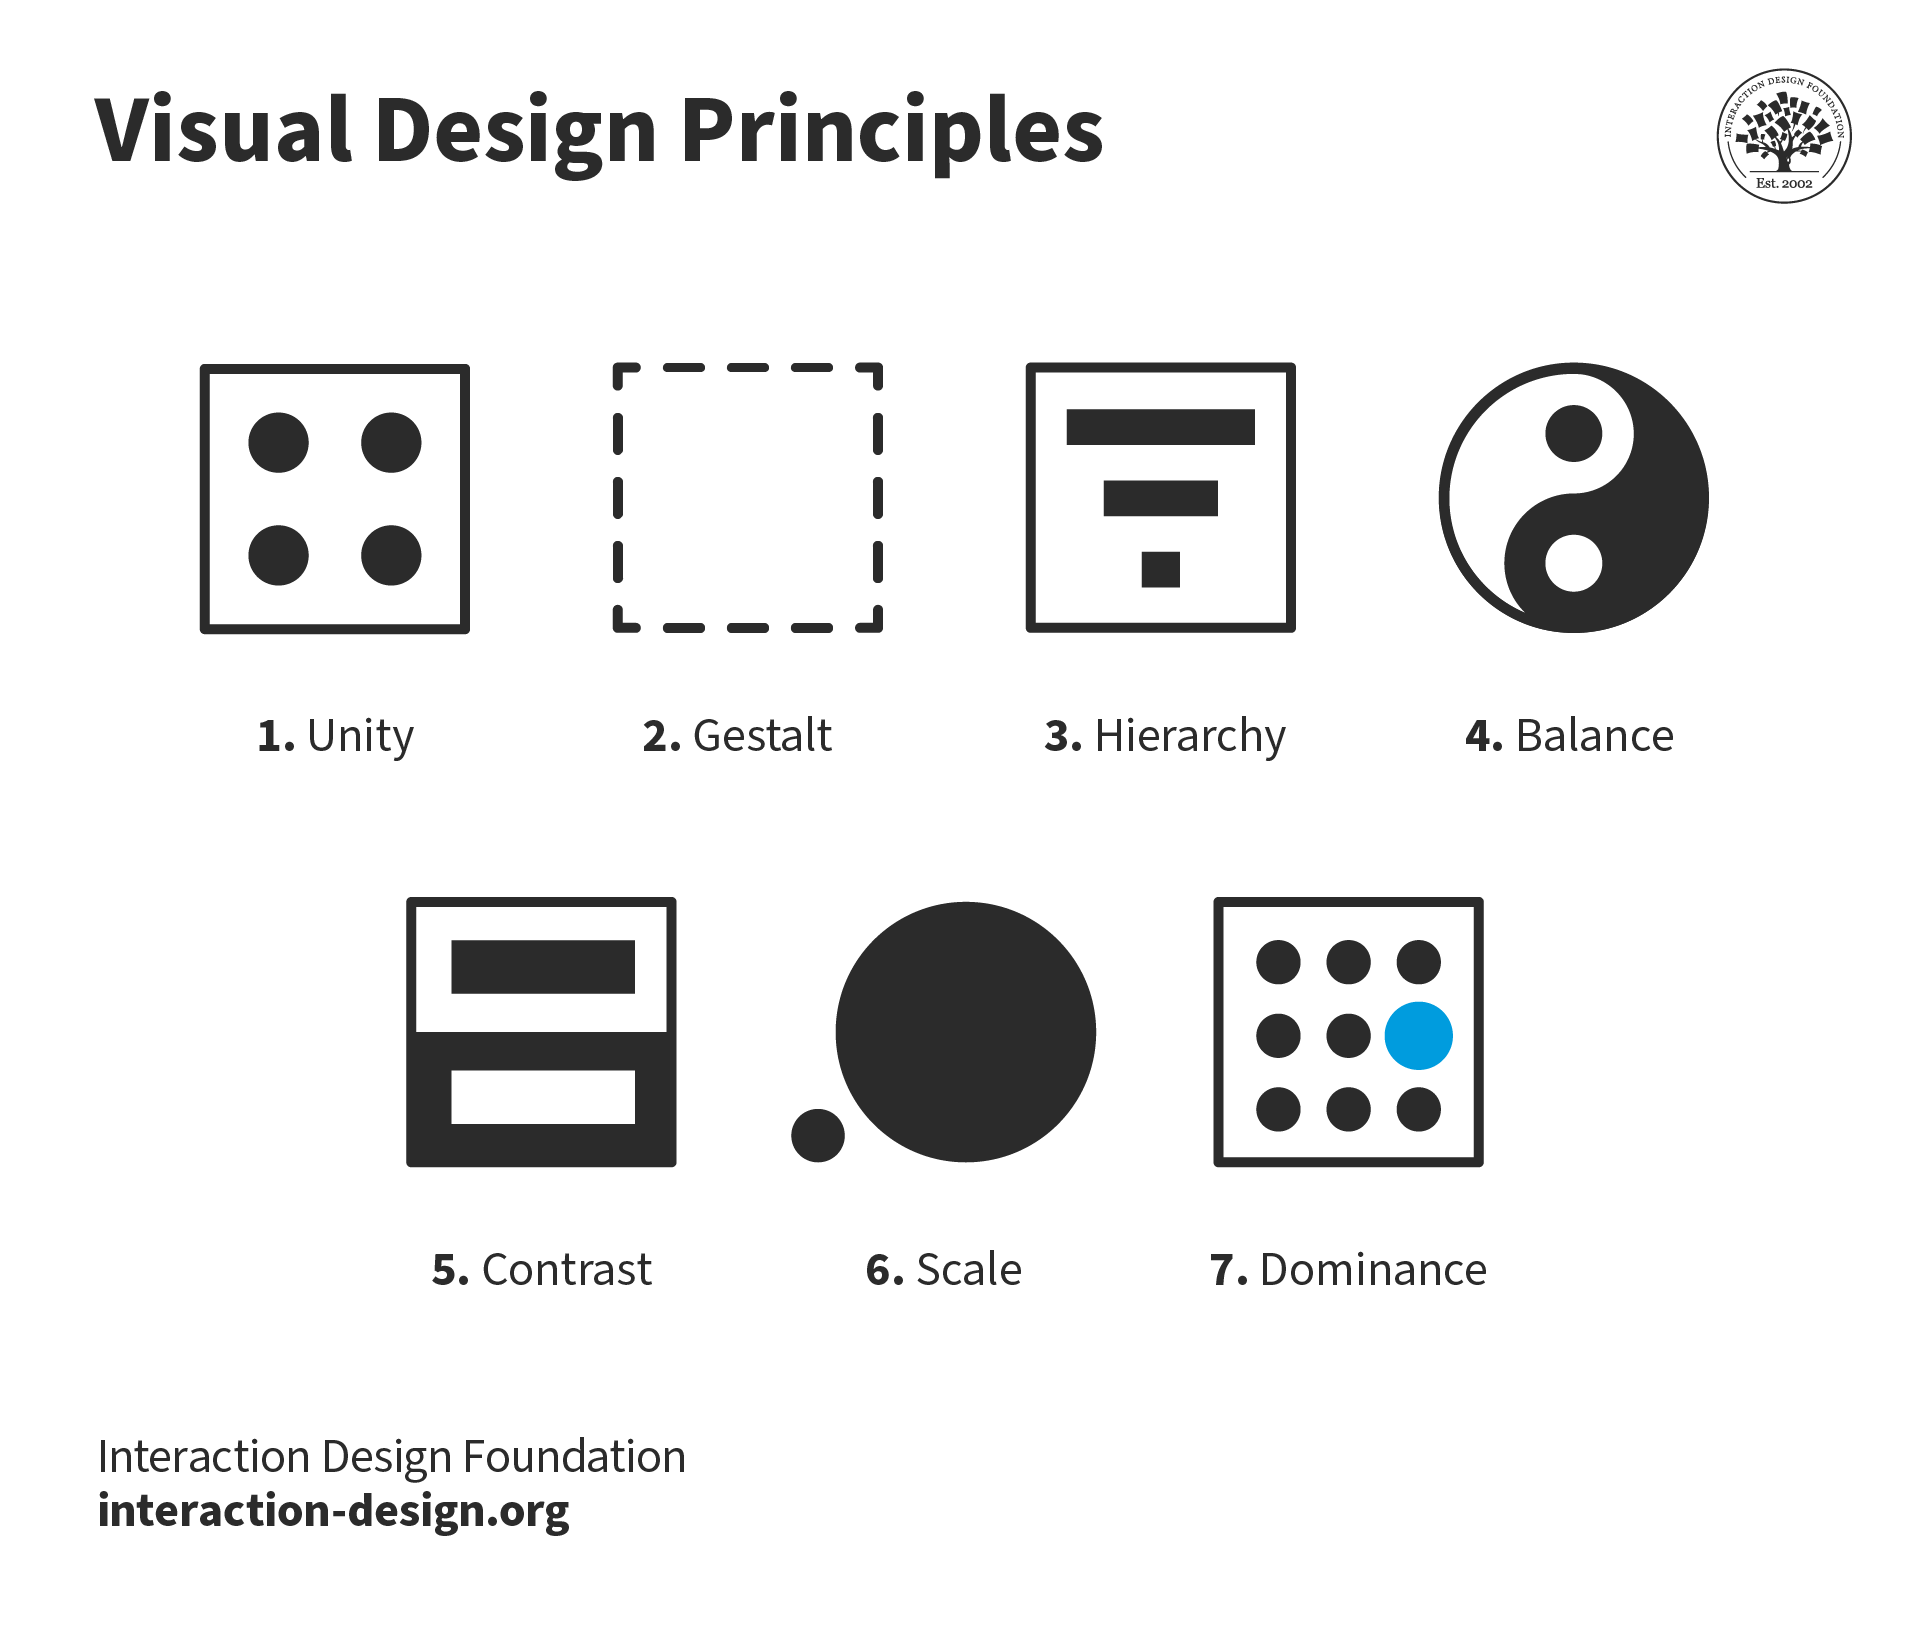 Seven principles of visual design: Unity, Gestalt, Hierarchy, Balance, Contrast, Scale and Dominance